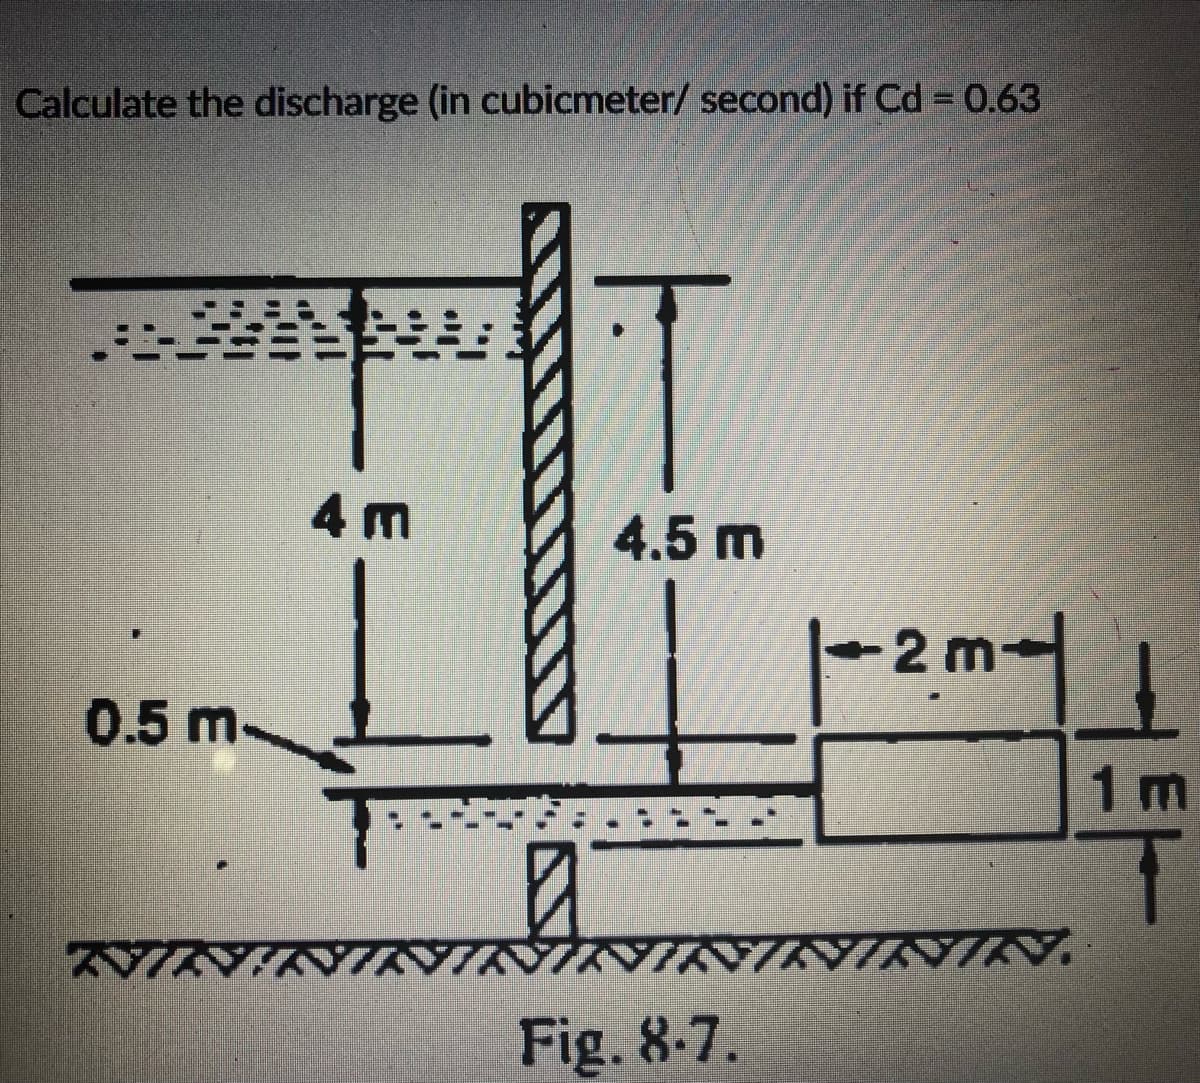 Calculate the discharge (in cubicmeter/ second) if Cd = 0.63
4 m
4.5 m
-2 m-
0.5 m.
Fig. 8-7.
